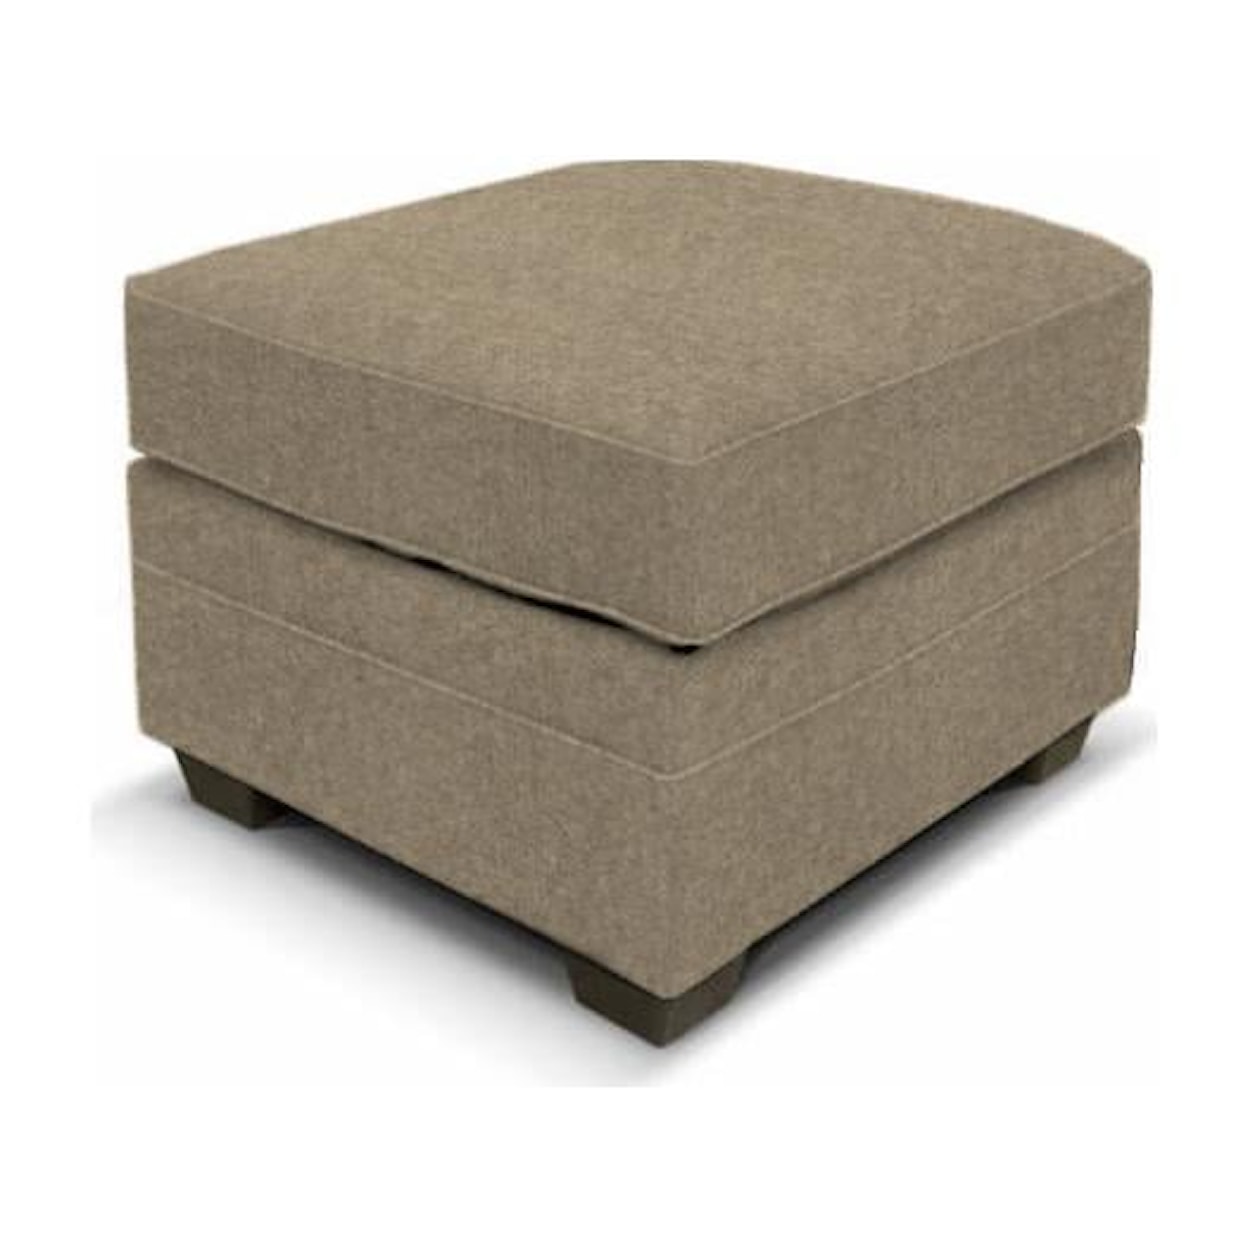 Dimensions 2250/N Series Welted Ottoman